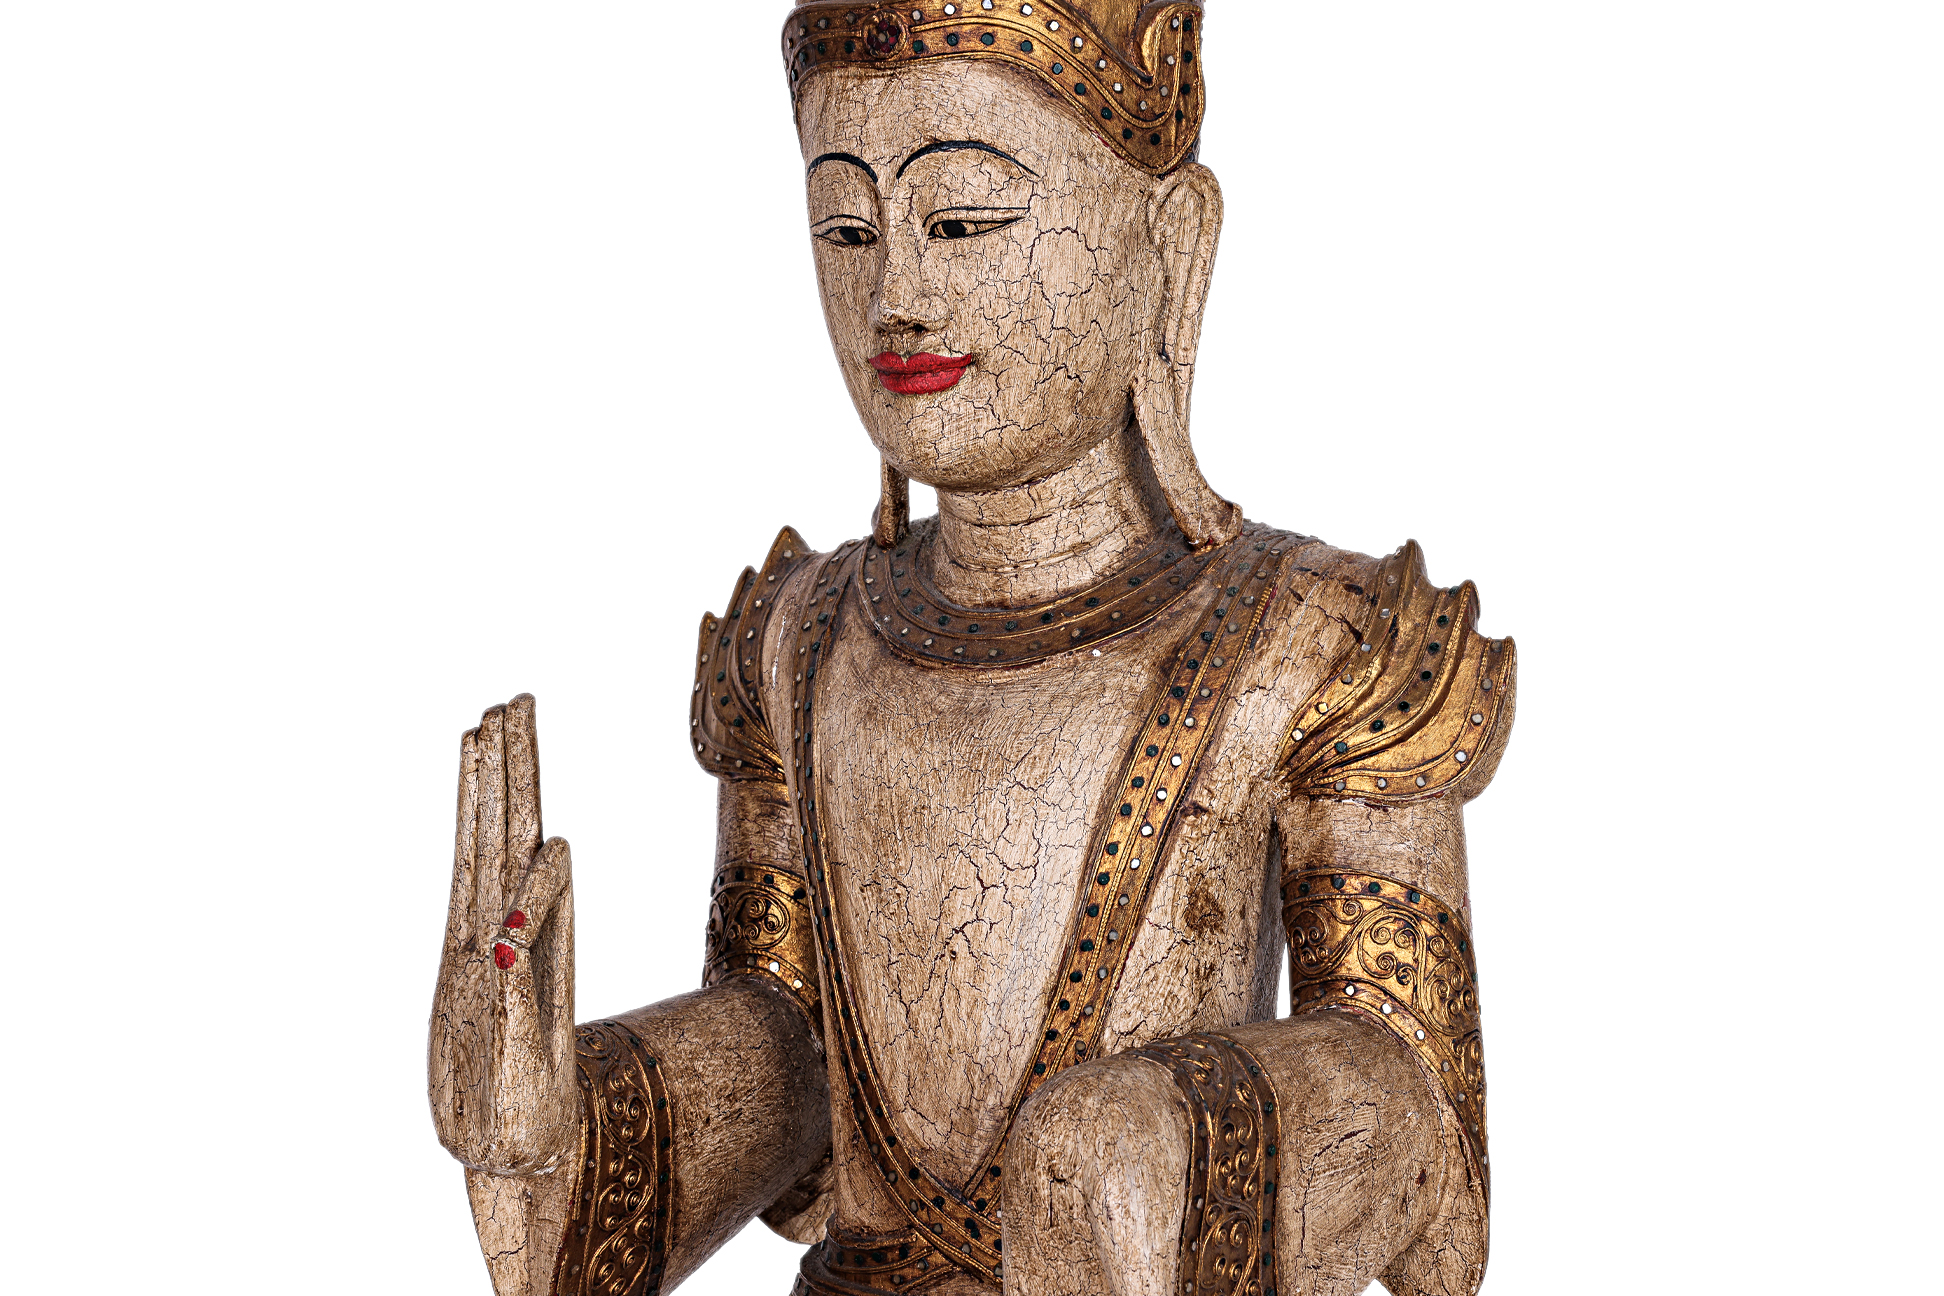 A VERY LARGE SOUTH-EAST ASIAN CARVED WOOD FIGURE OF BUDDHA - Image 3 of 3